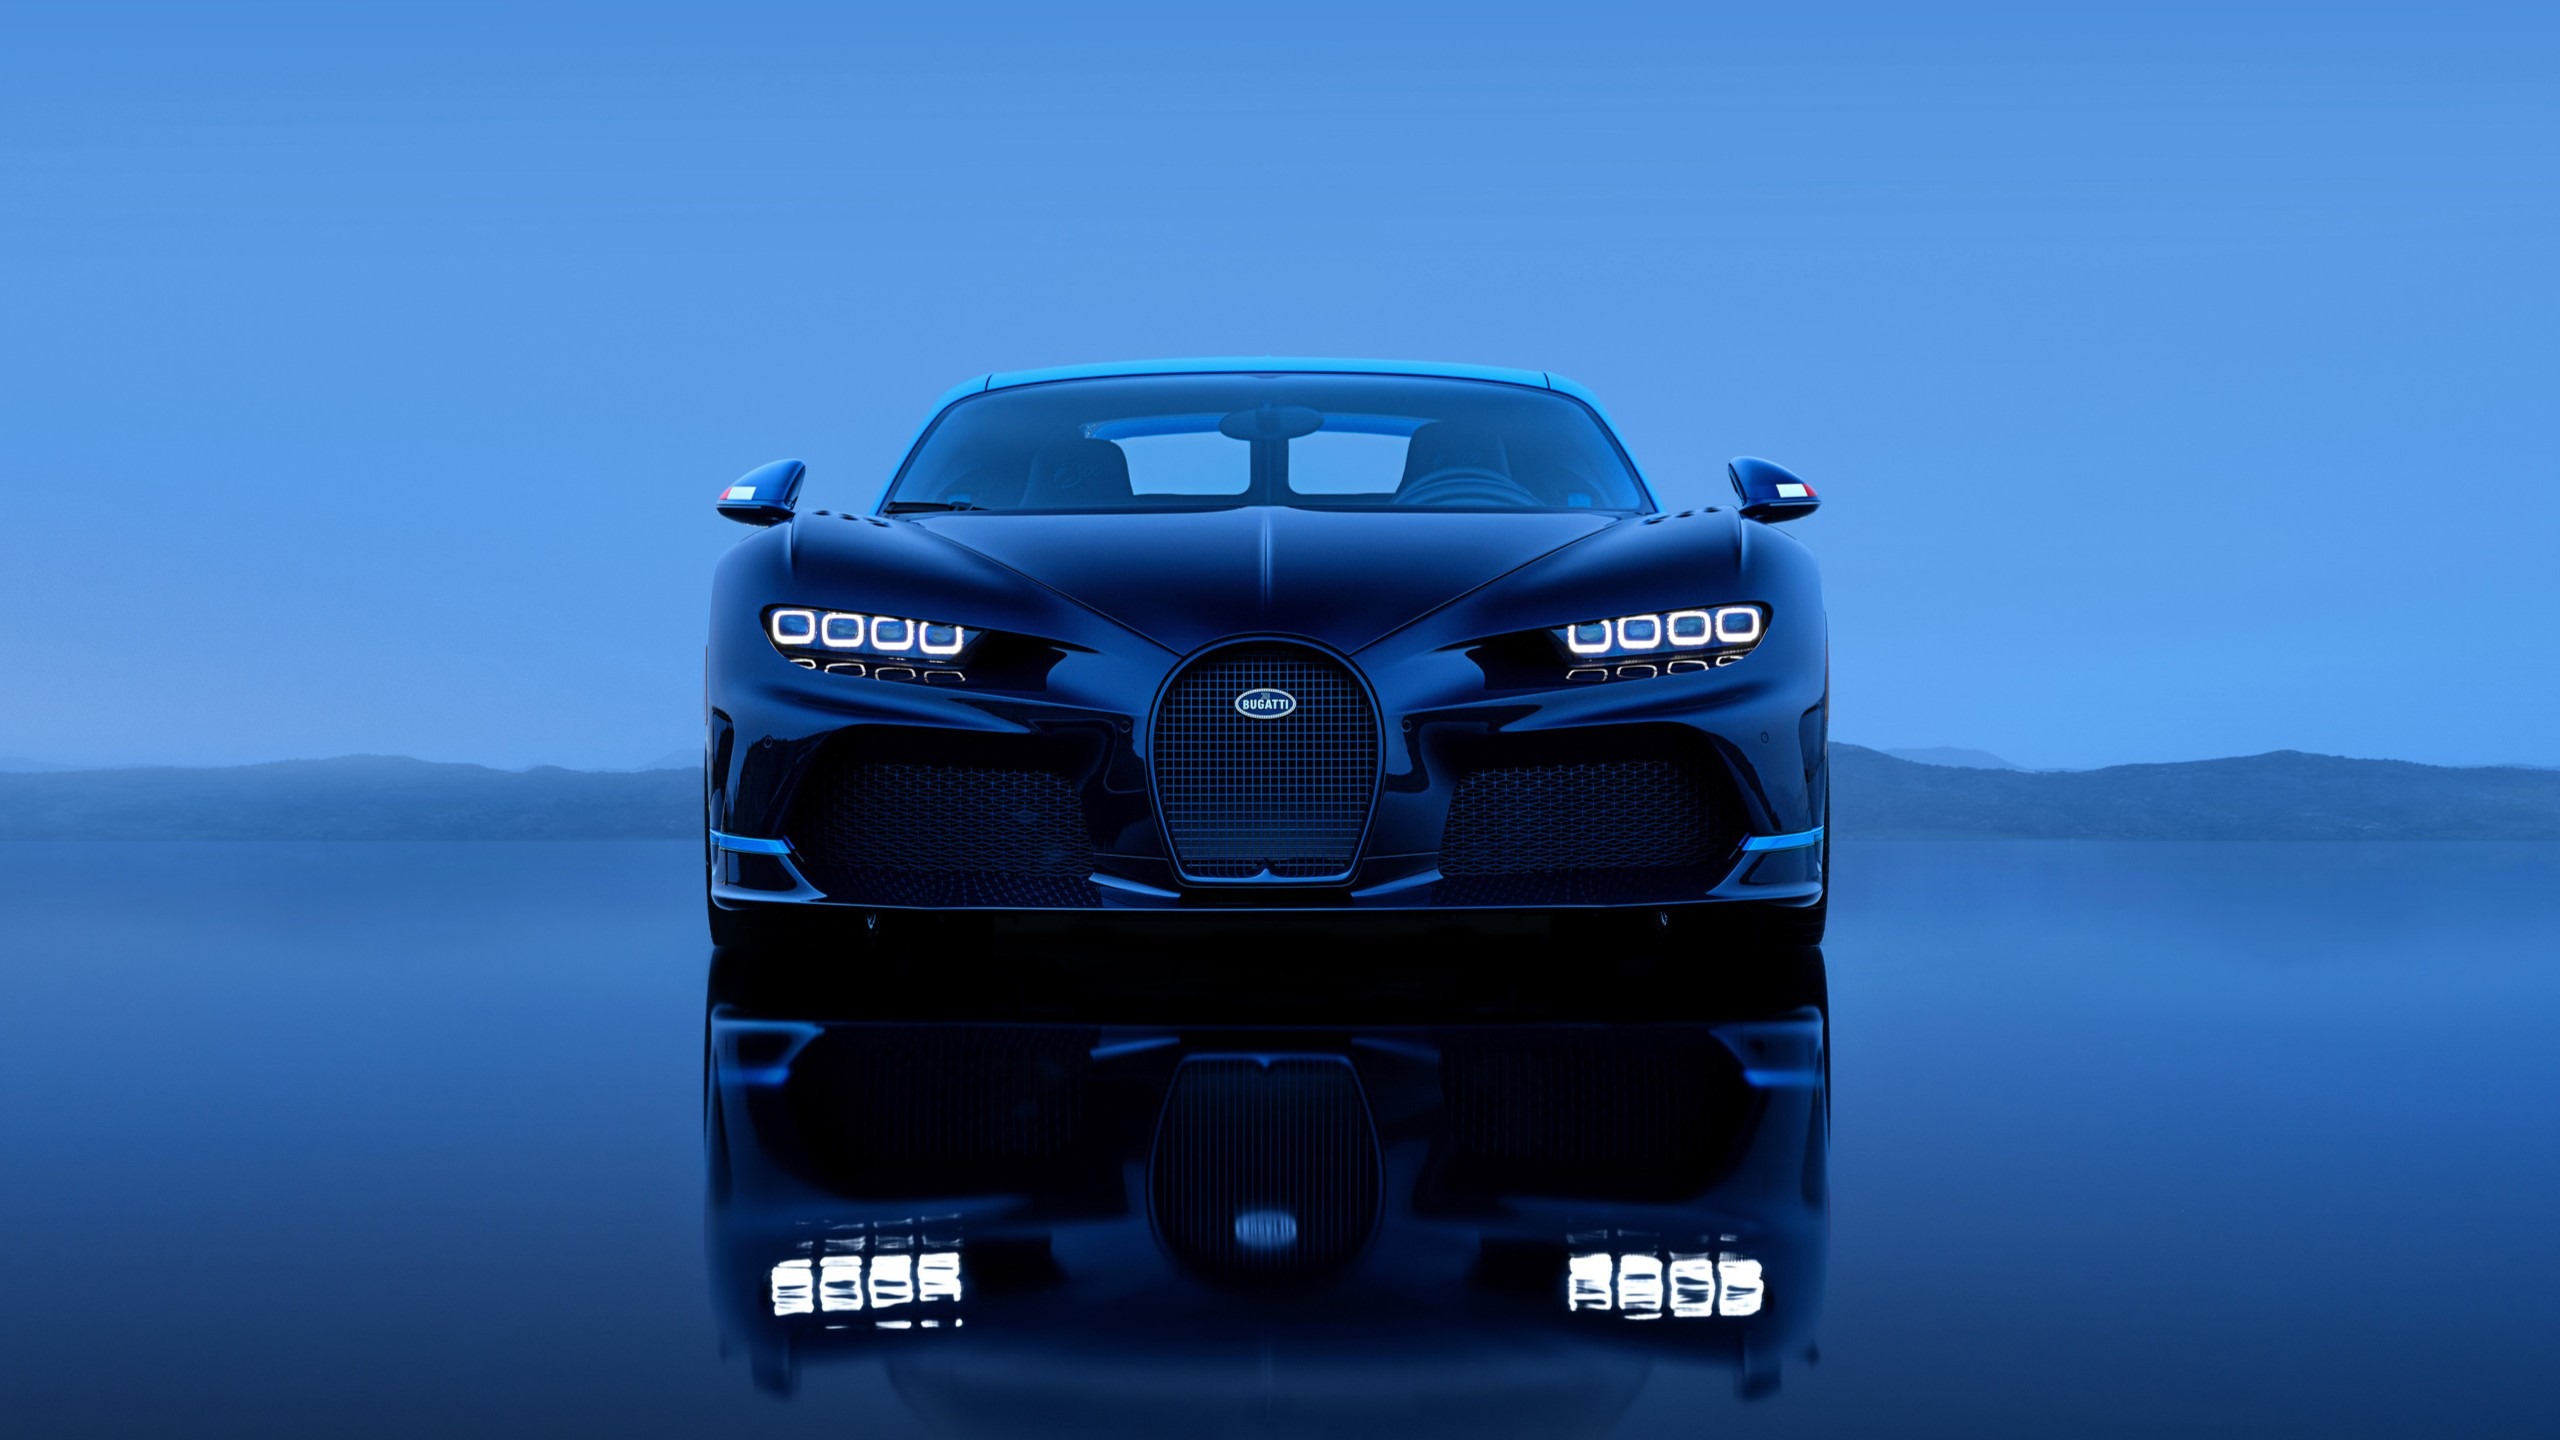 Head-On View Of A Bugatti L’Ultime Super Sport In A Fade Of French Racing Blue And Atlantic Blue